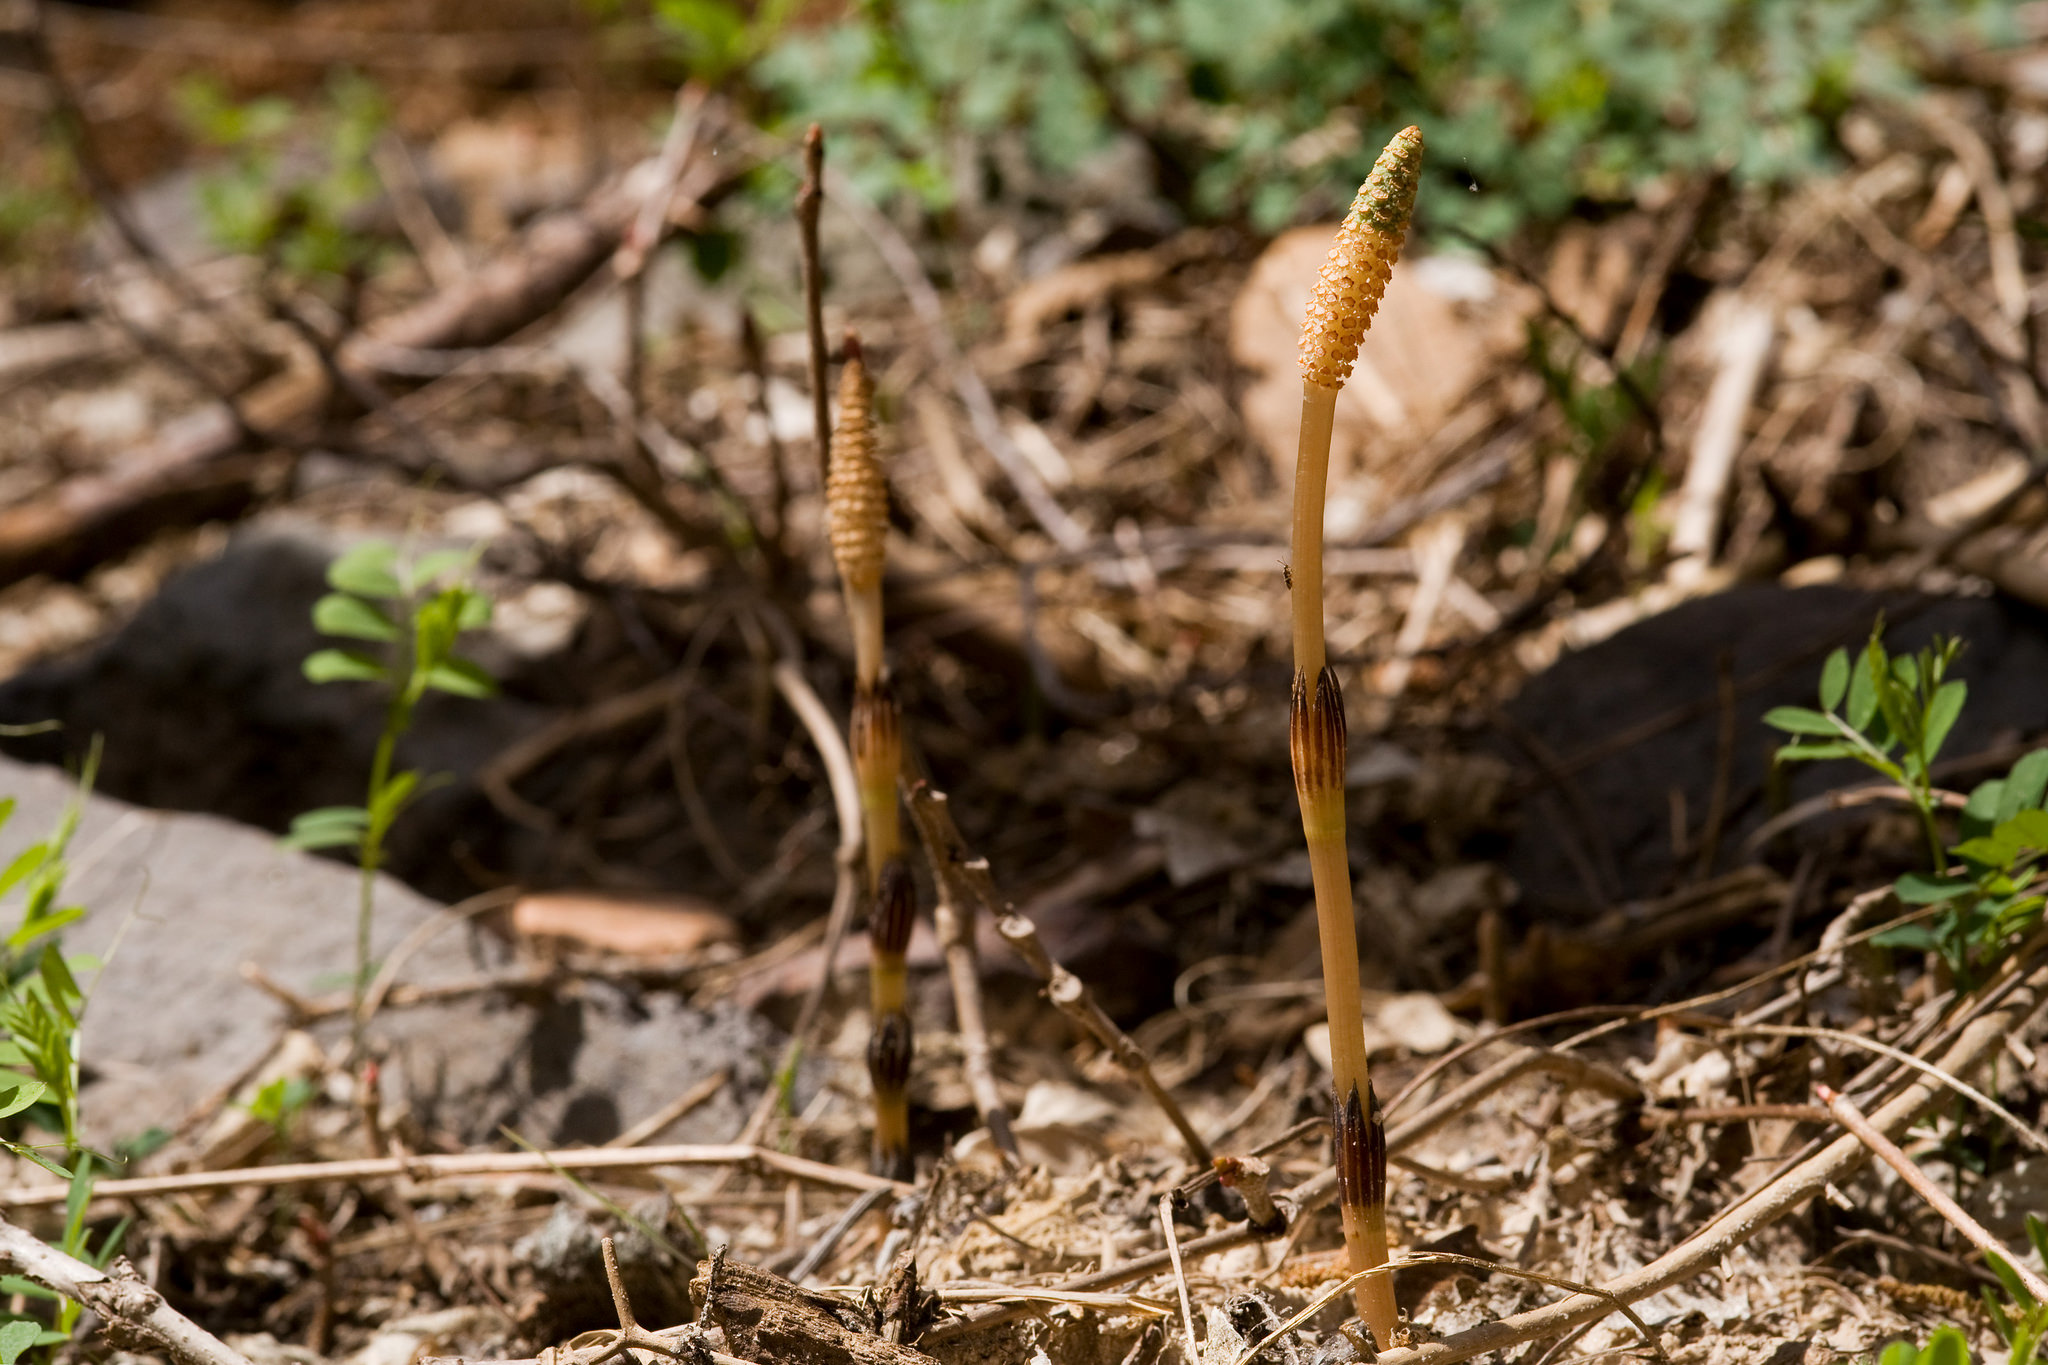 Growth habit showing single orange-yellow stem, dark stem joints, and cone. This is the form the plant takes in spring.